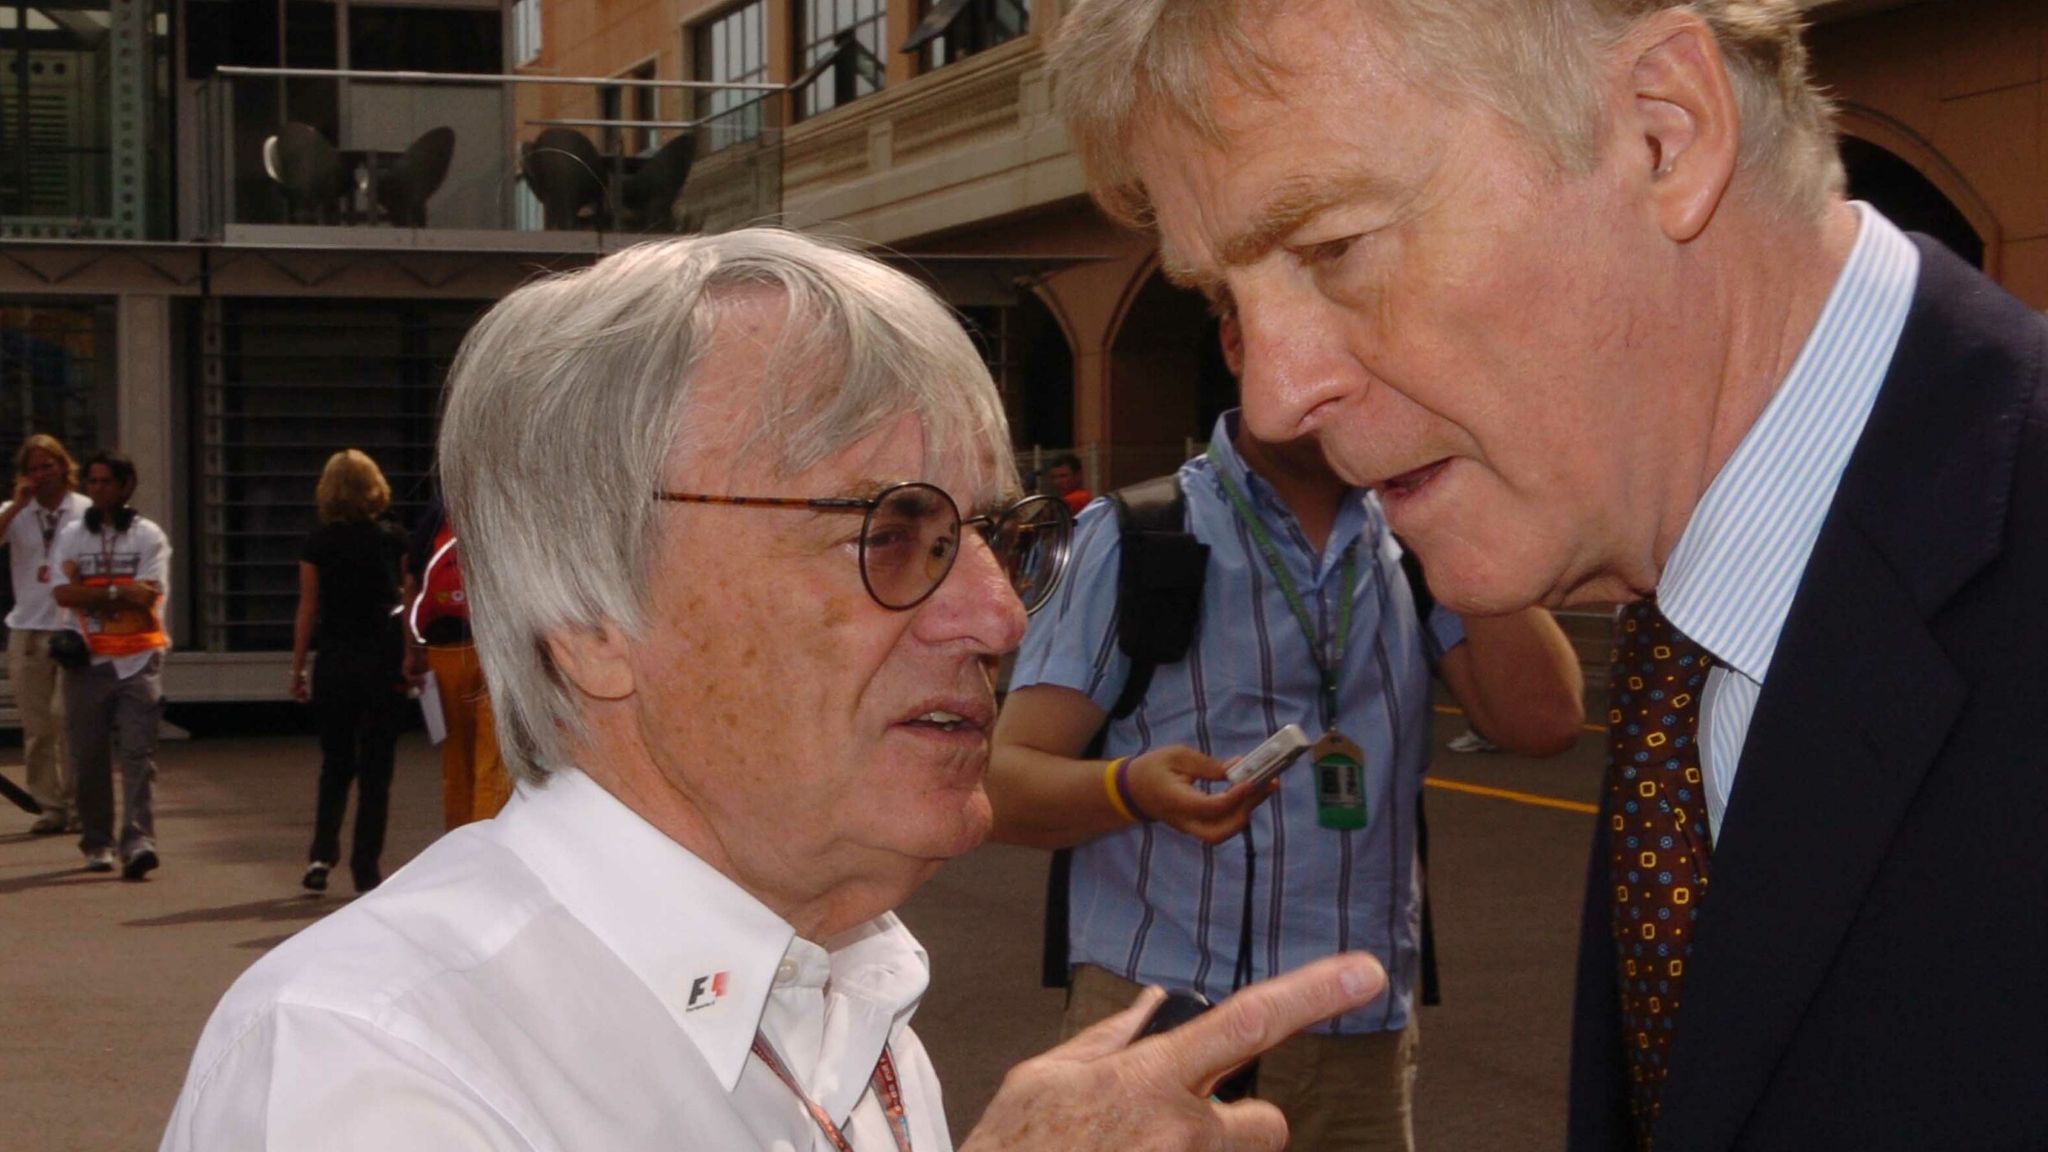 Max Mosley Former Formula 1 Boss And Privacy Campaigner